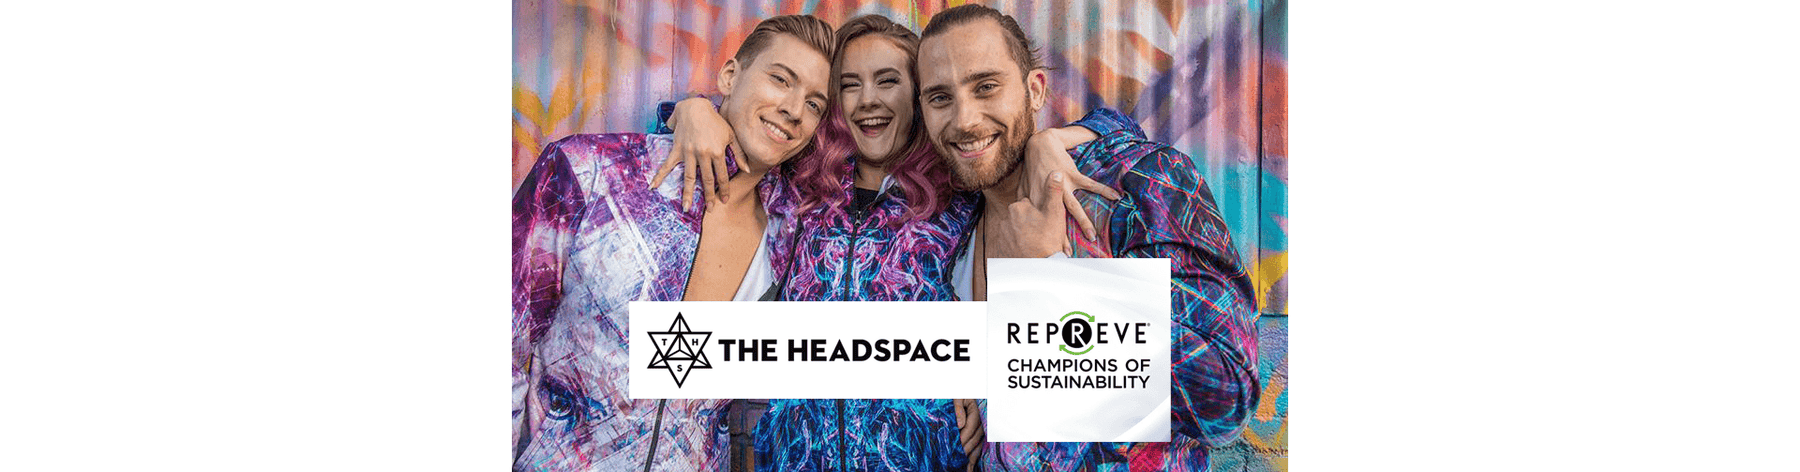 Trippy Fashion Made From Recycled Plastics - The Headspace’s Pledge To Earth